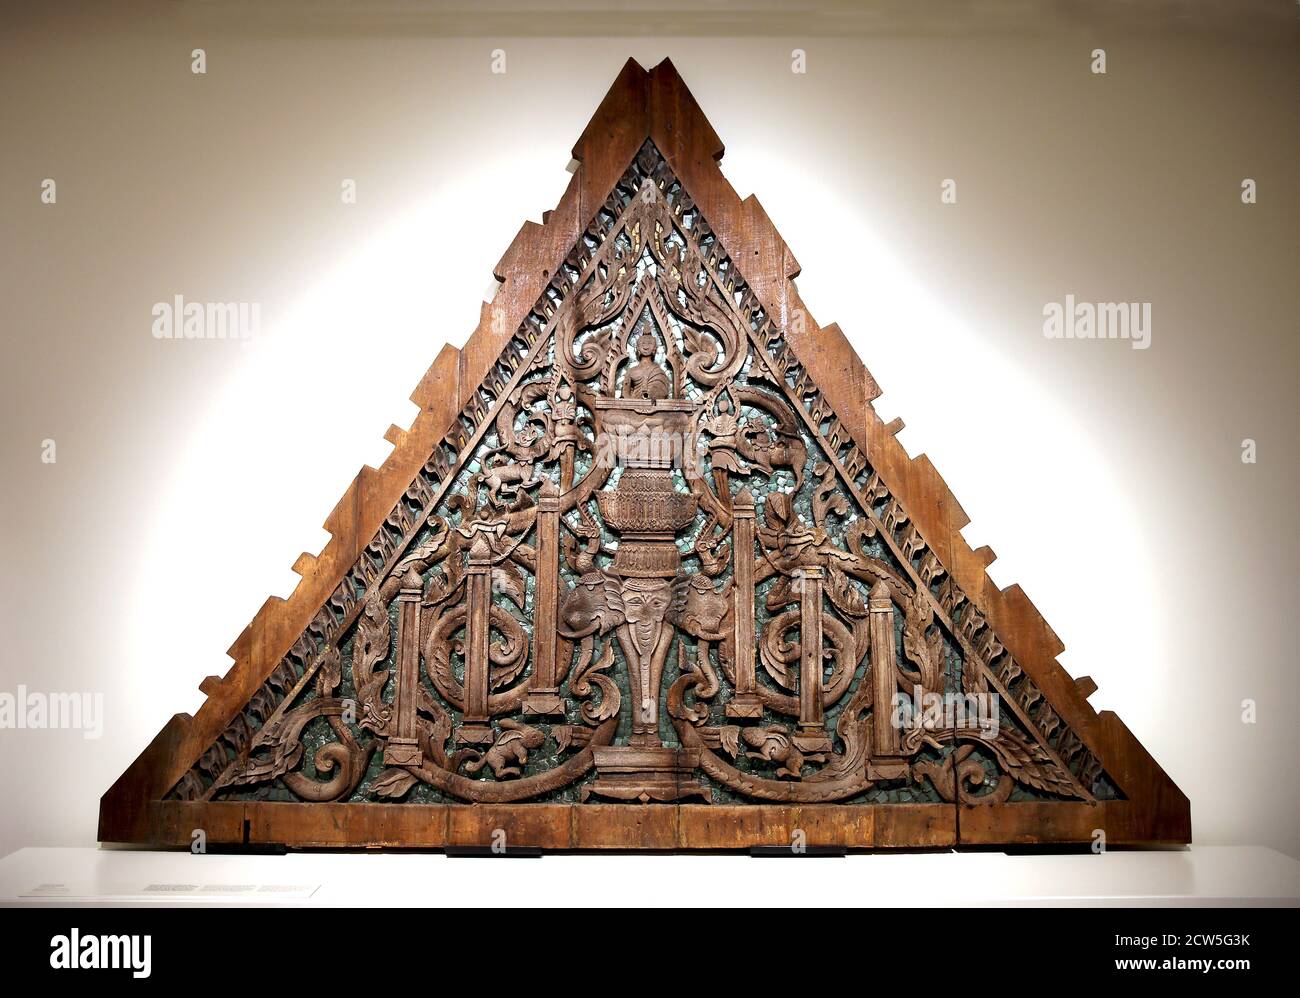 Temple front pediment. Wood with glass inlays. 18th century. Suphan Buri, Thailand. Thai art. Museum of World Cultures, Barcelona, Spain. Stock Photo